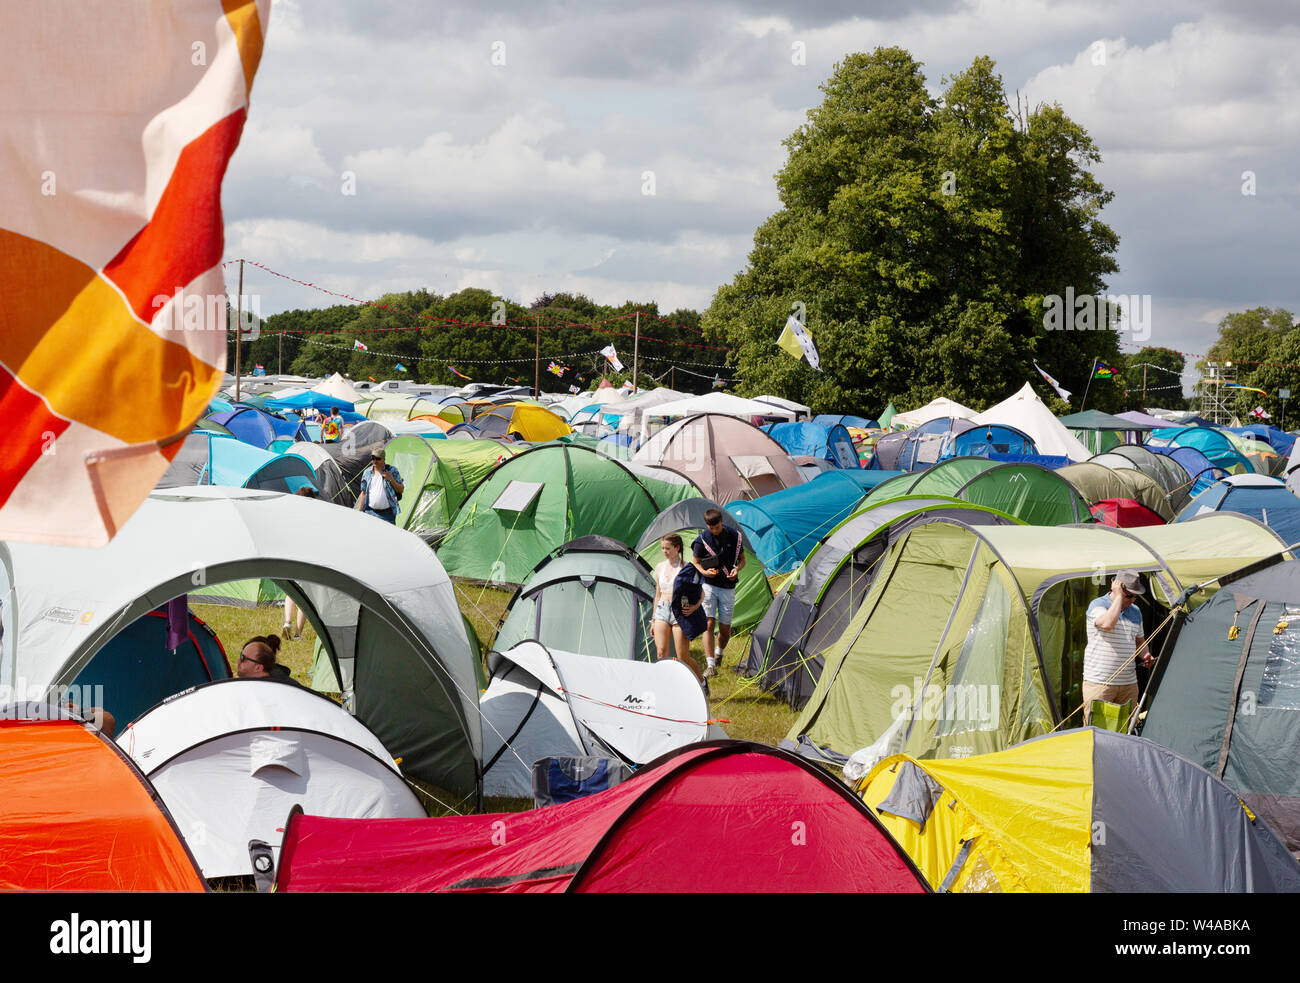 Latitude festival tents - one of the crowded tented areas, Suffolk Latitude Festival UK 2019 Stock Photo